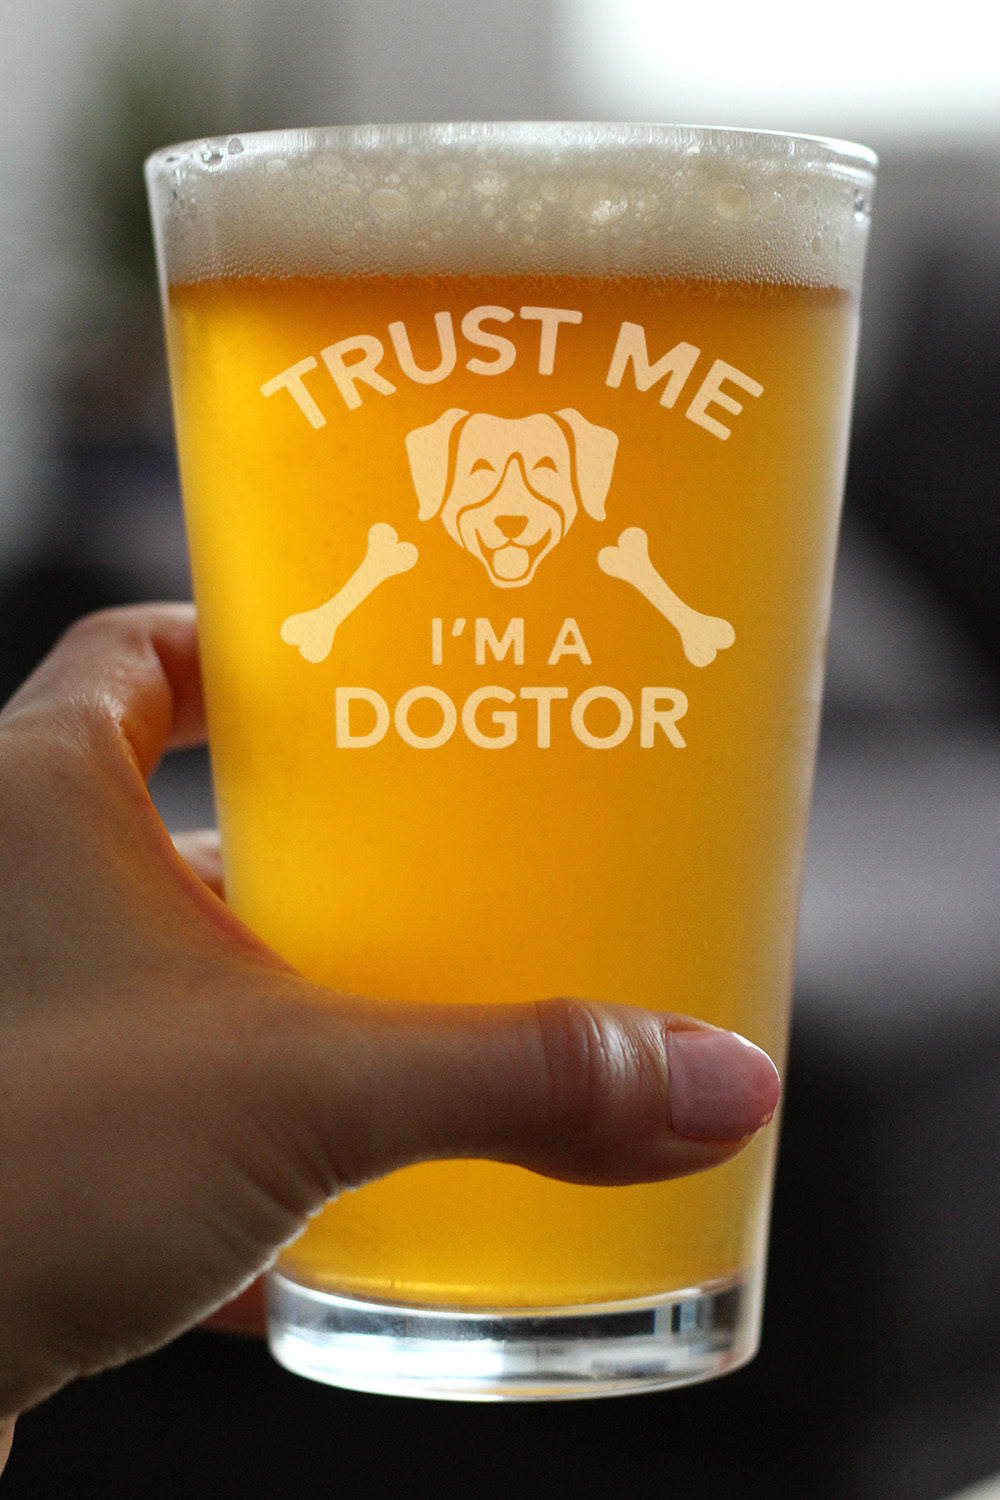 Dogtor - Pint Glass for Beer - Funny Dog Gifts for Veterinarians and Vet Techs - 16 oz Glasses